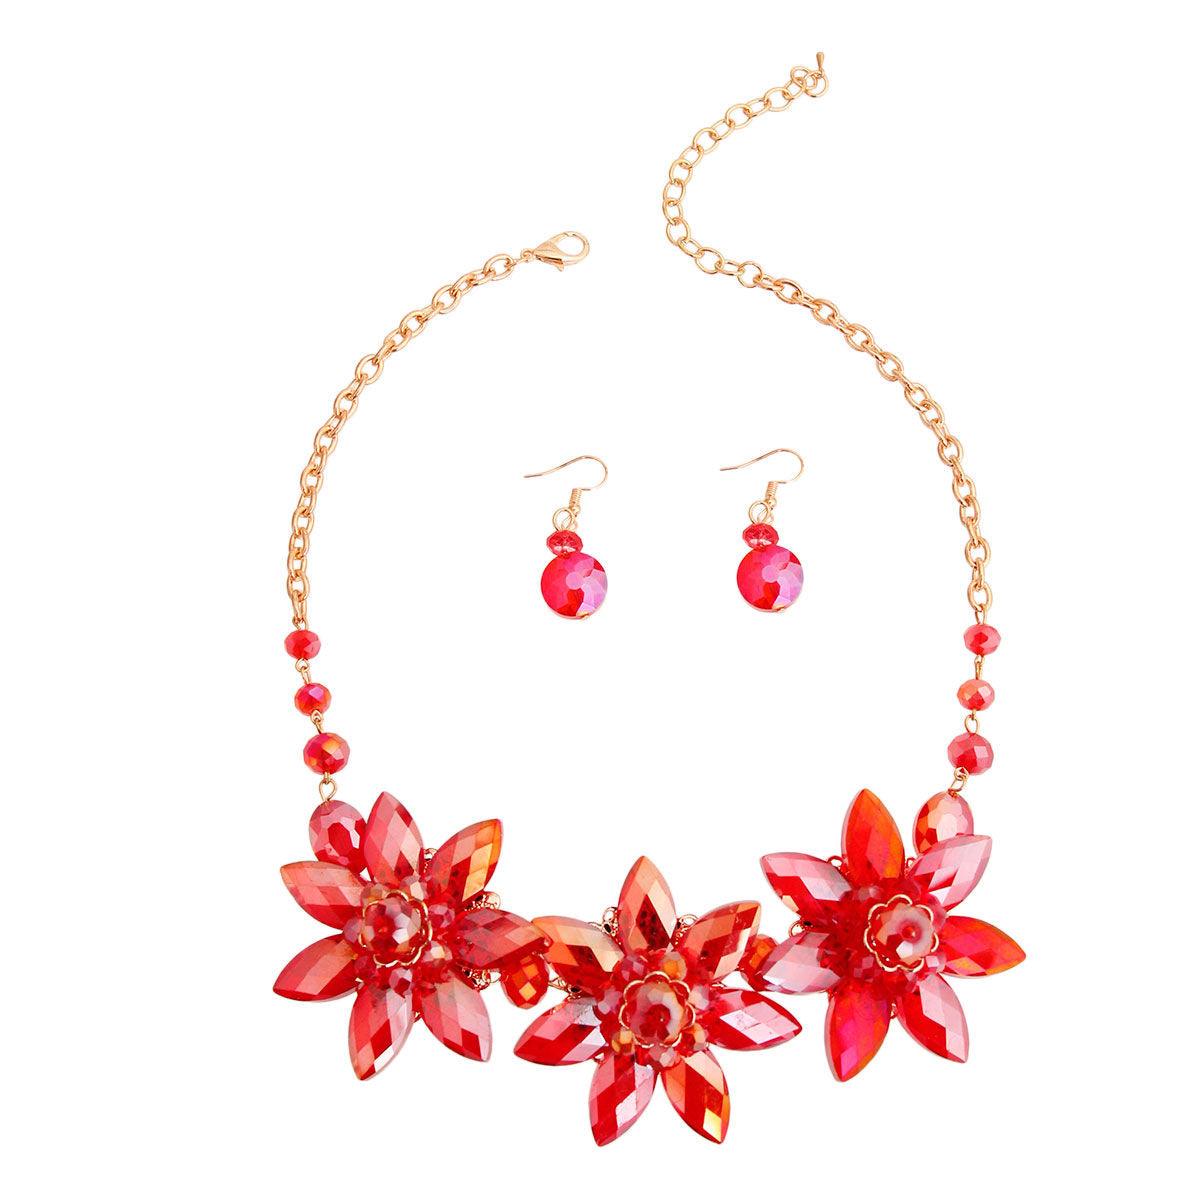 Beauty and Femininity: Red Floral Necklace Set